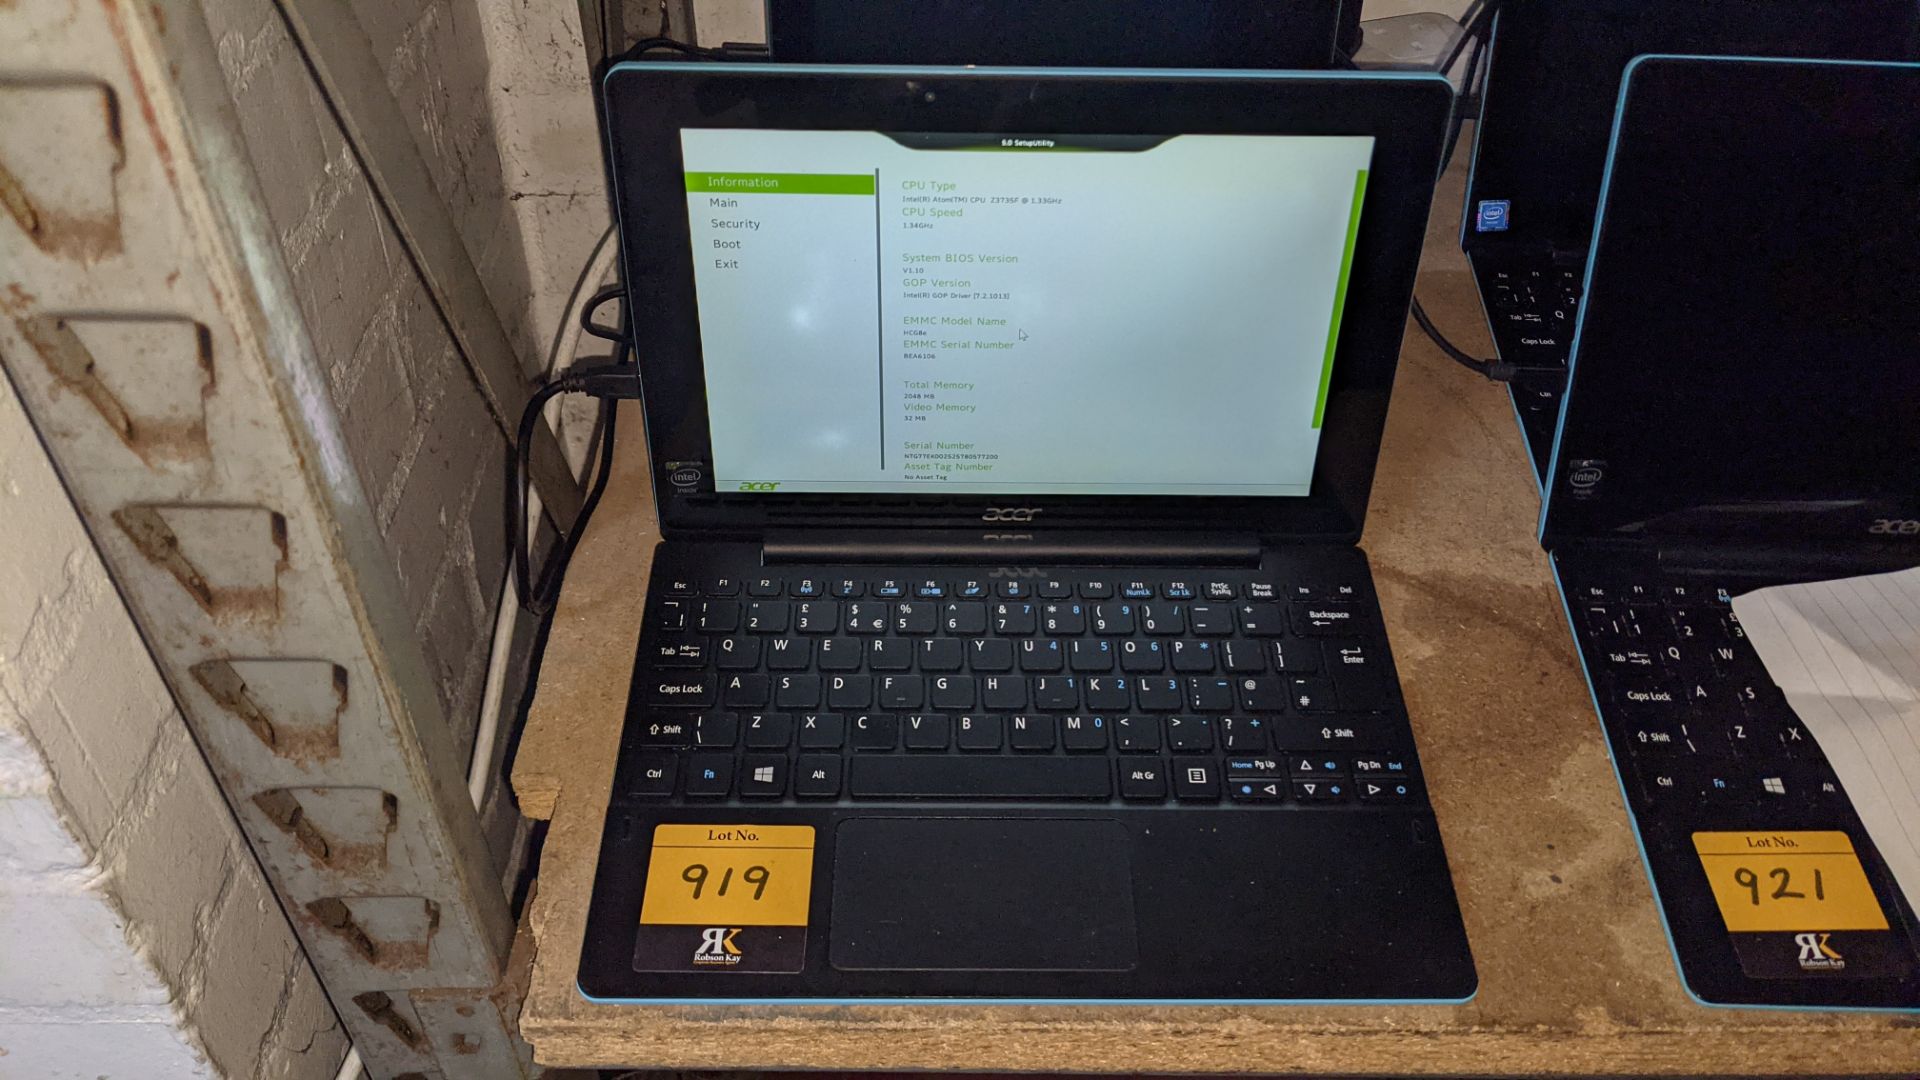 Acer notebook comprising touchscreen tablet and detachable keyboard Aspire Switch 10 E, Atom Z3735F